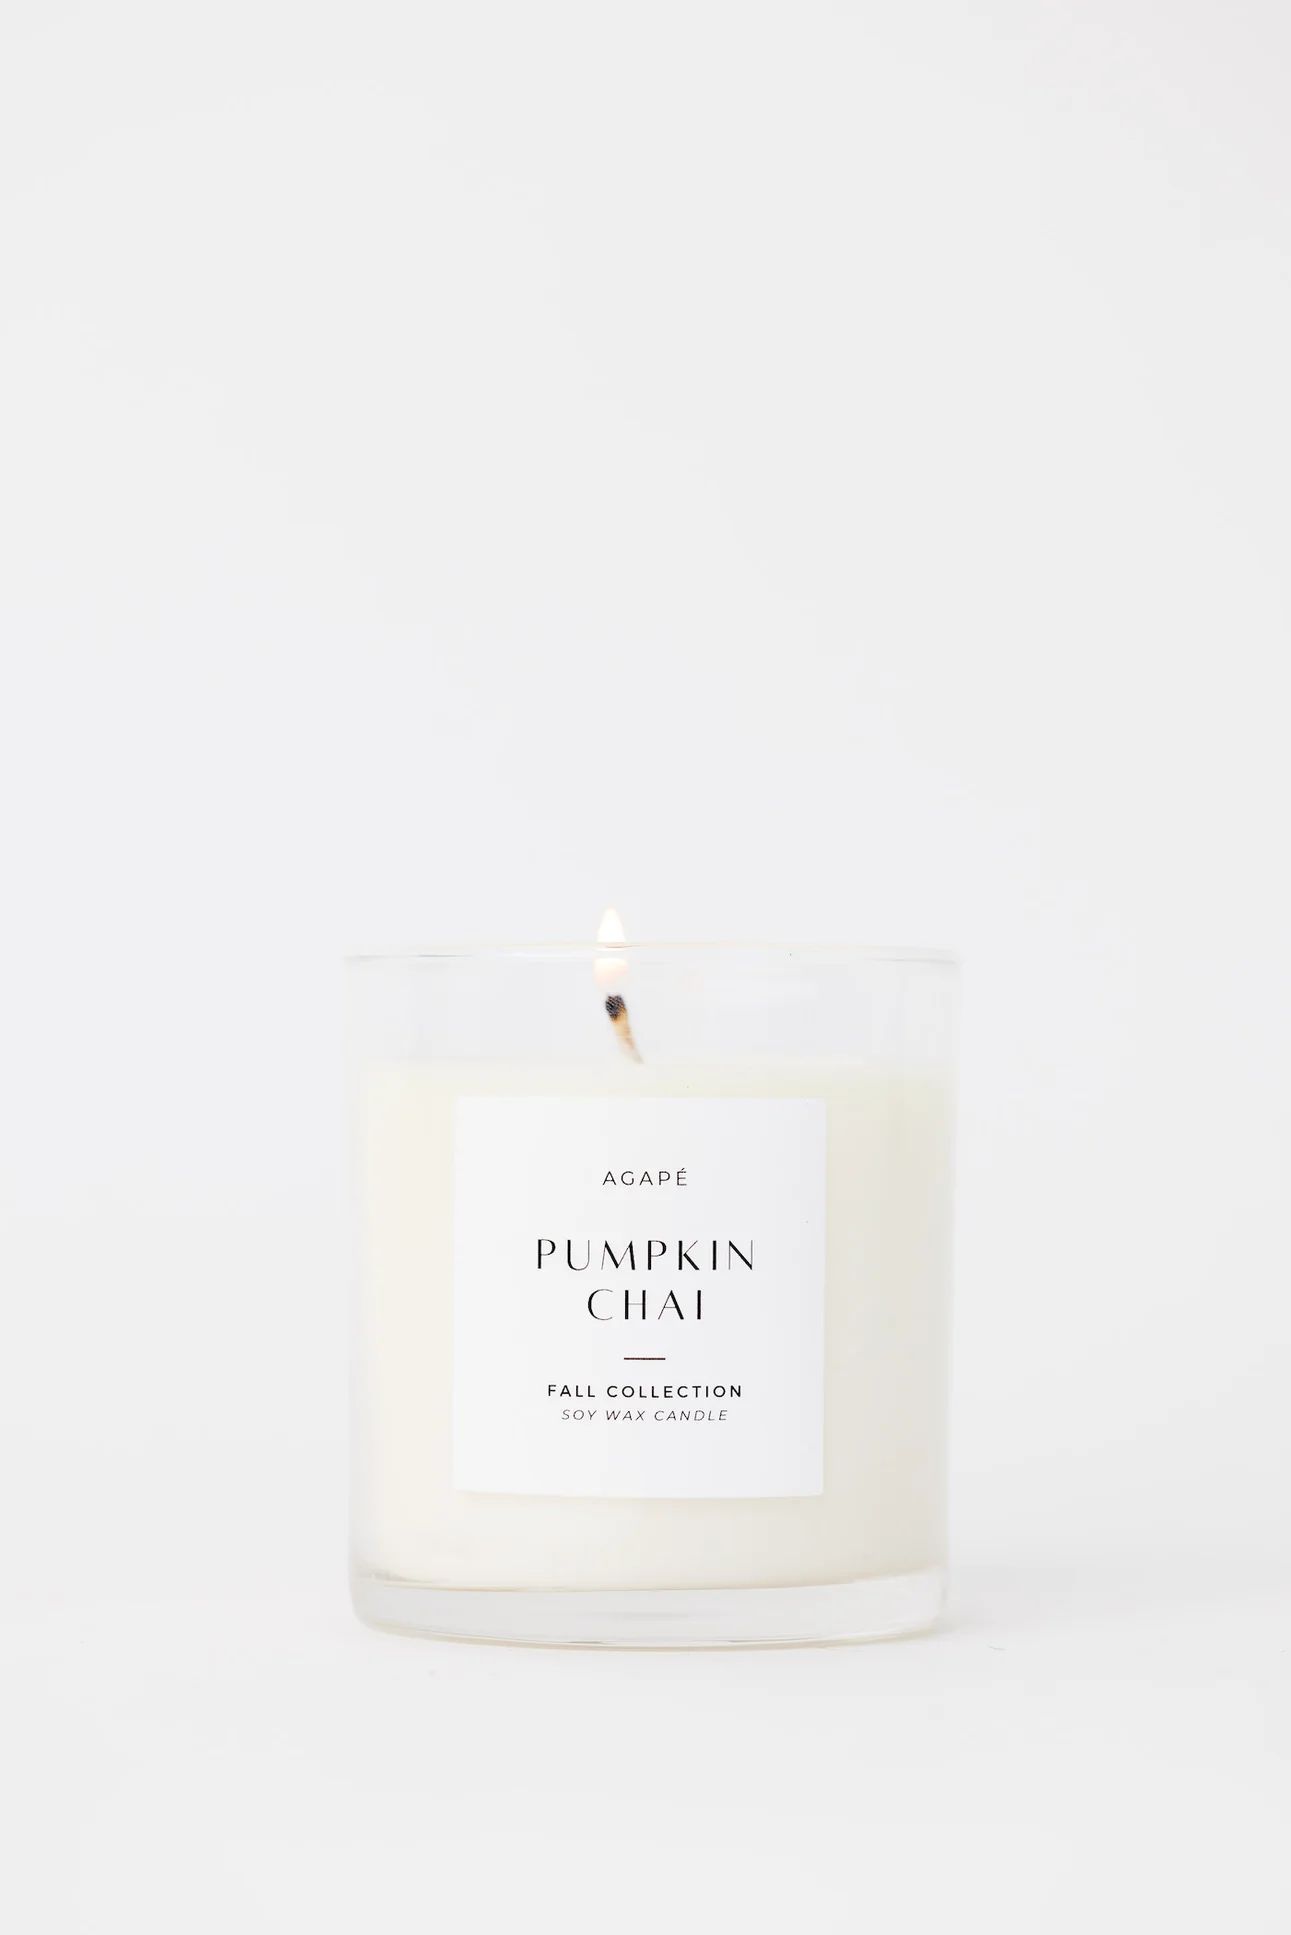 Pumpkin Chai Candle - Agape Candles - 11 oz | THELIFESTYLEDCO